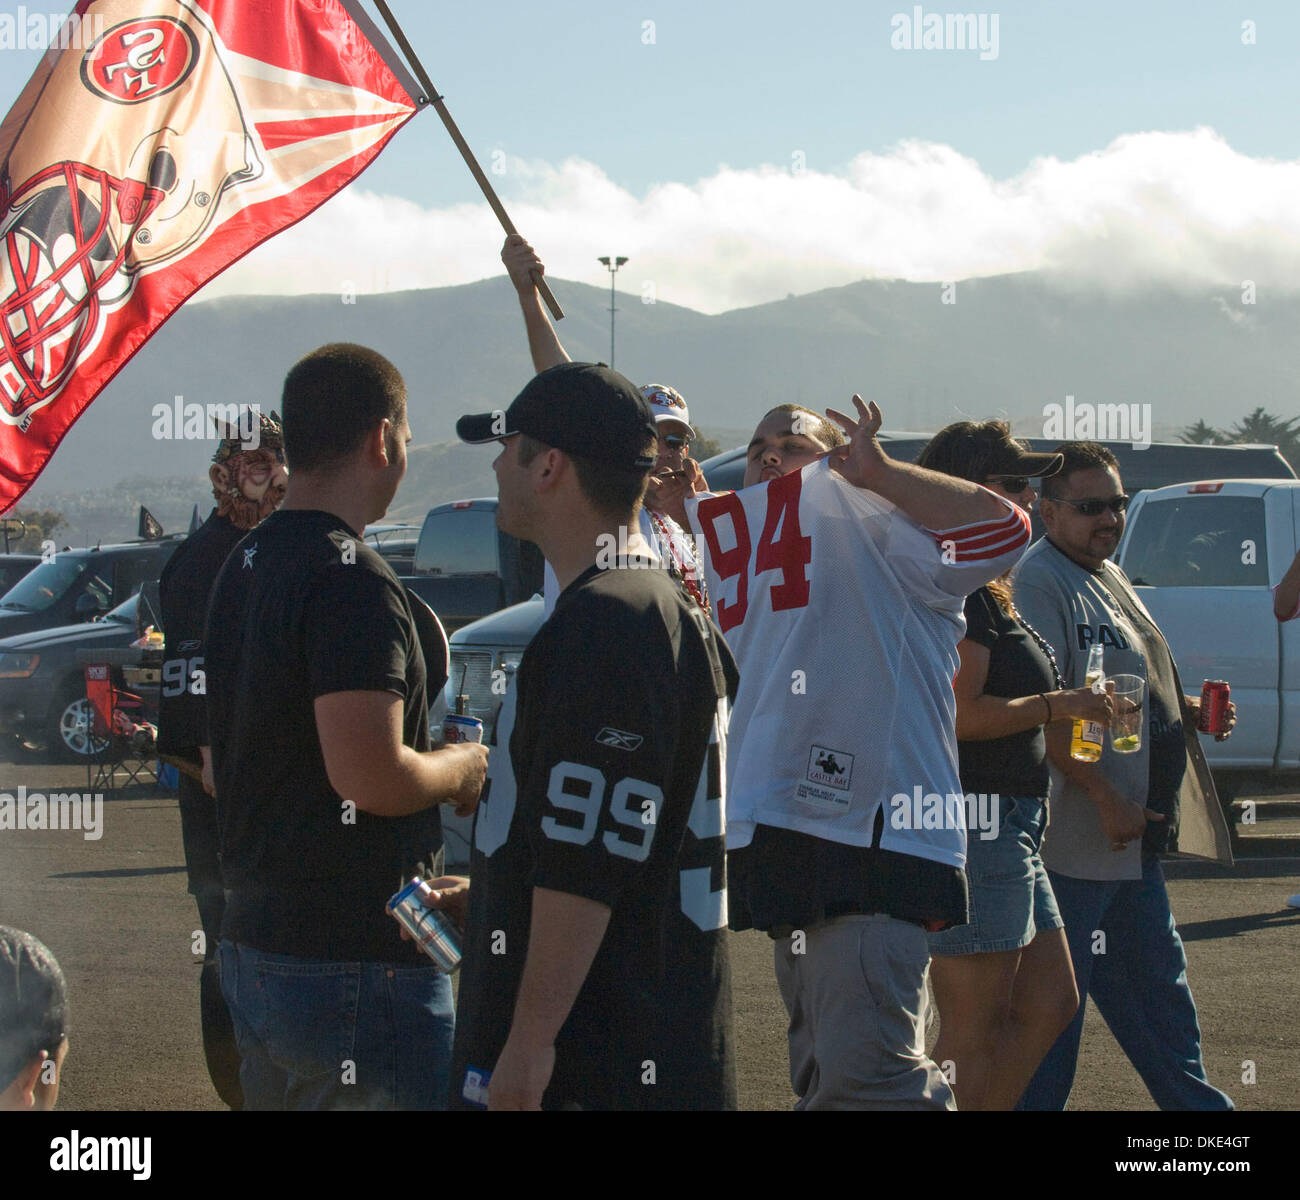 Aug.18, 2007 - San Francisco, California, U.S. - San Francisco 49ers vs Oakland Raiders at Bill Walsh field. Tailgate activities in parking lot before game.  This kind of taunting went on a lot. (Credit: © Al Golub/ZUMApress.com) Stock Photo